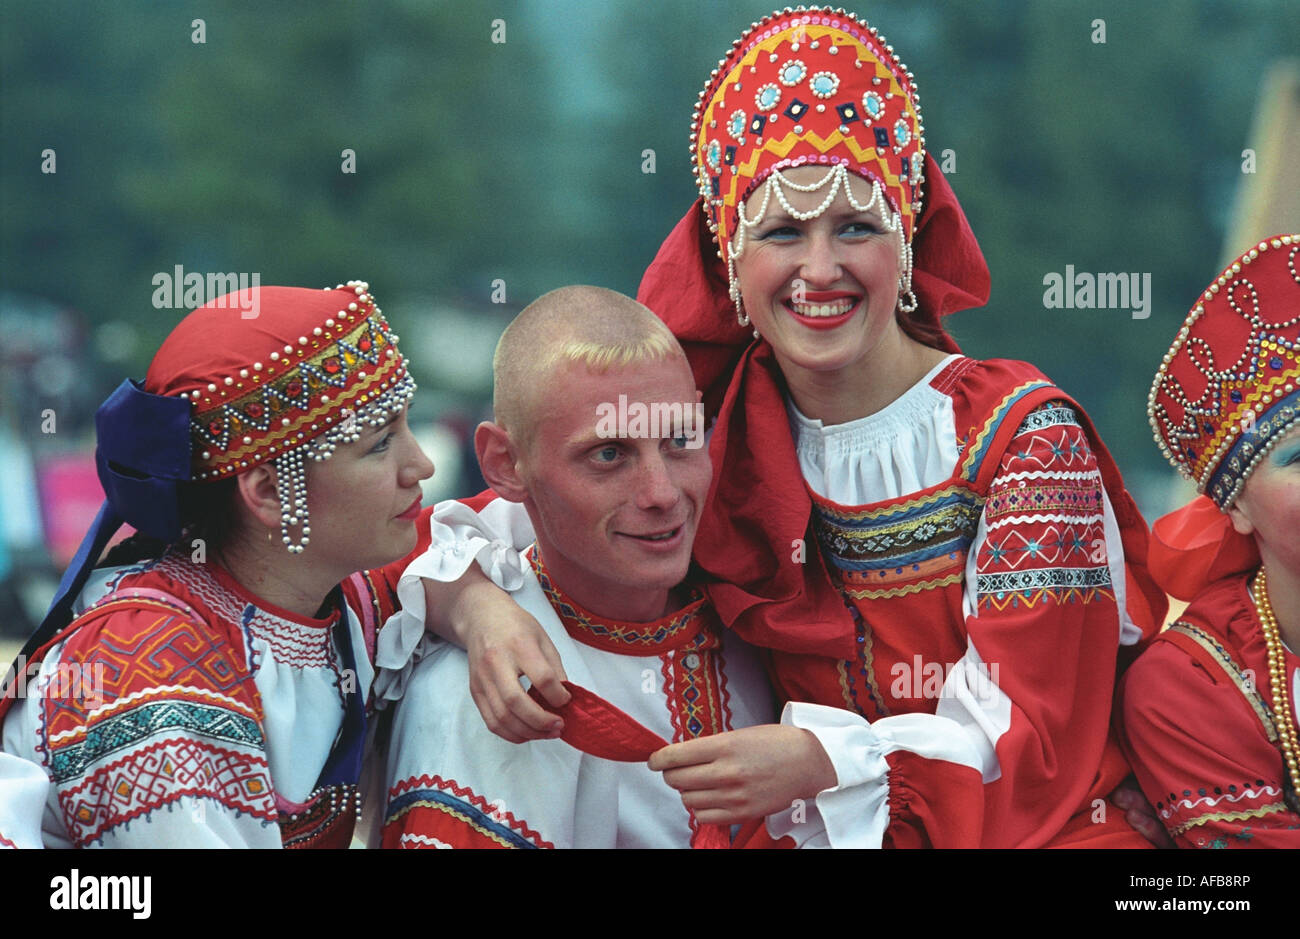 Portrait of man and women in Russian native raiment. El-Oiyn - national festival of Altaic people. Russia Stock Photo